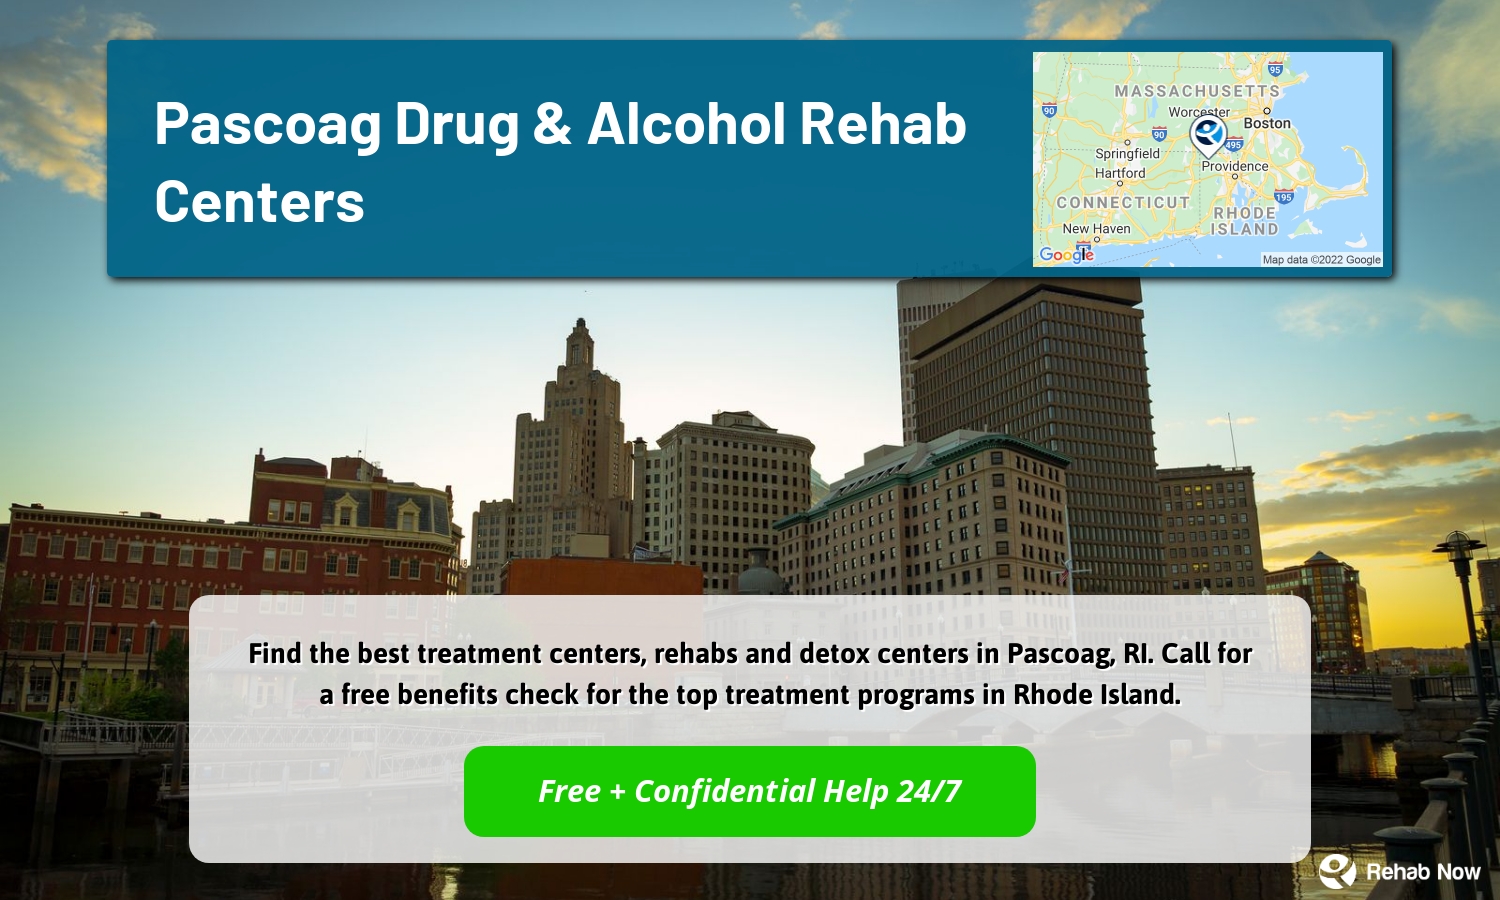 Find the best treatment centers, rehabs and detox centers in Pascoag, RI. Call for a free benefits check for the top treatment programs in Rhode Island.